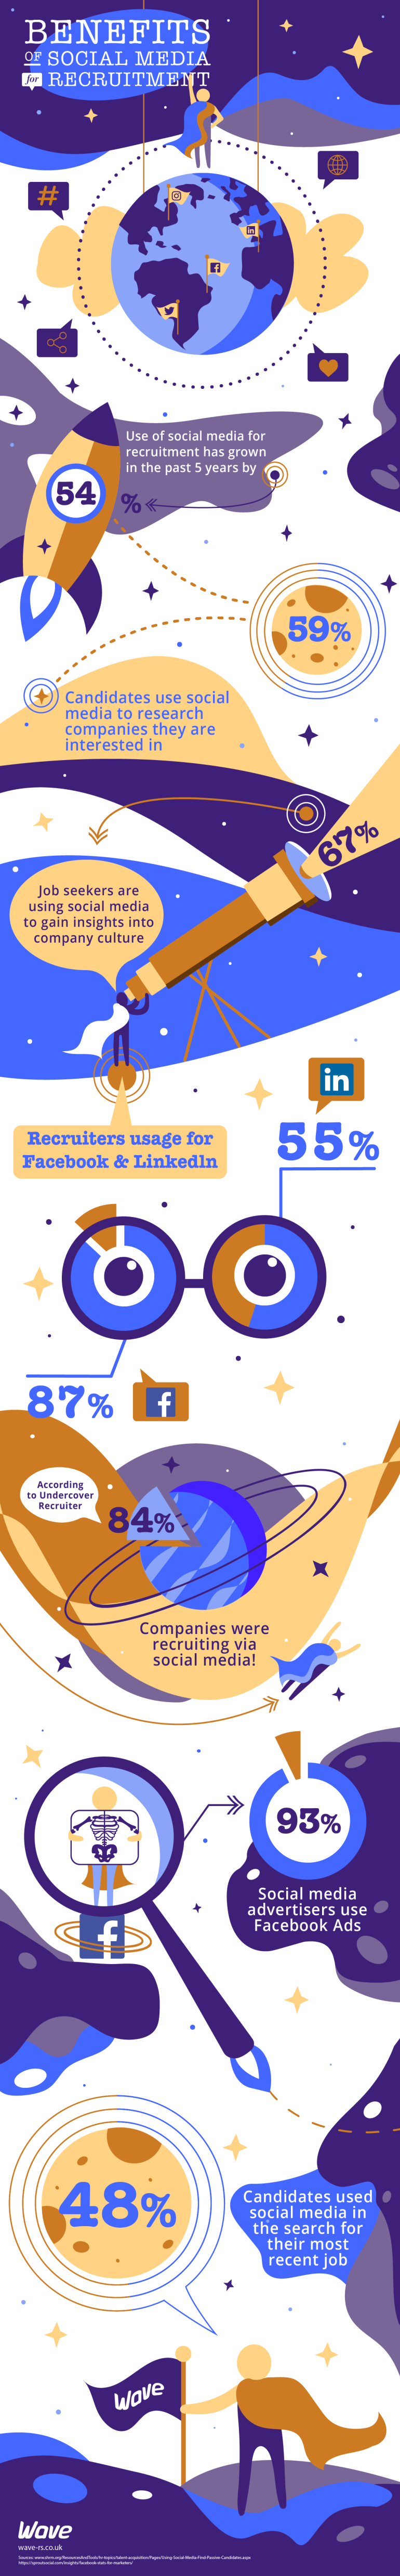 Social Media Infographic.png